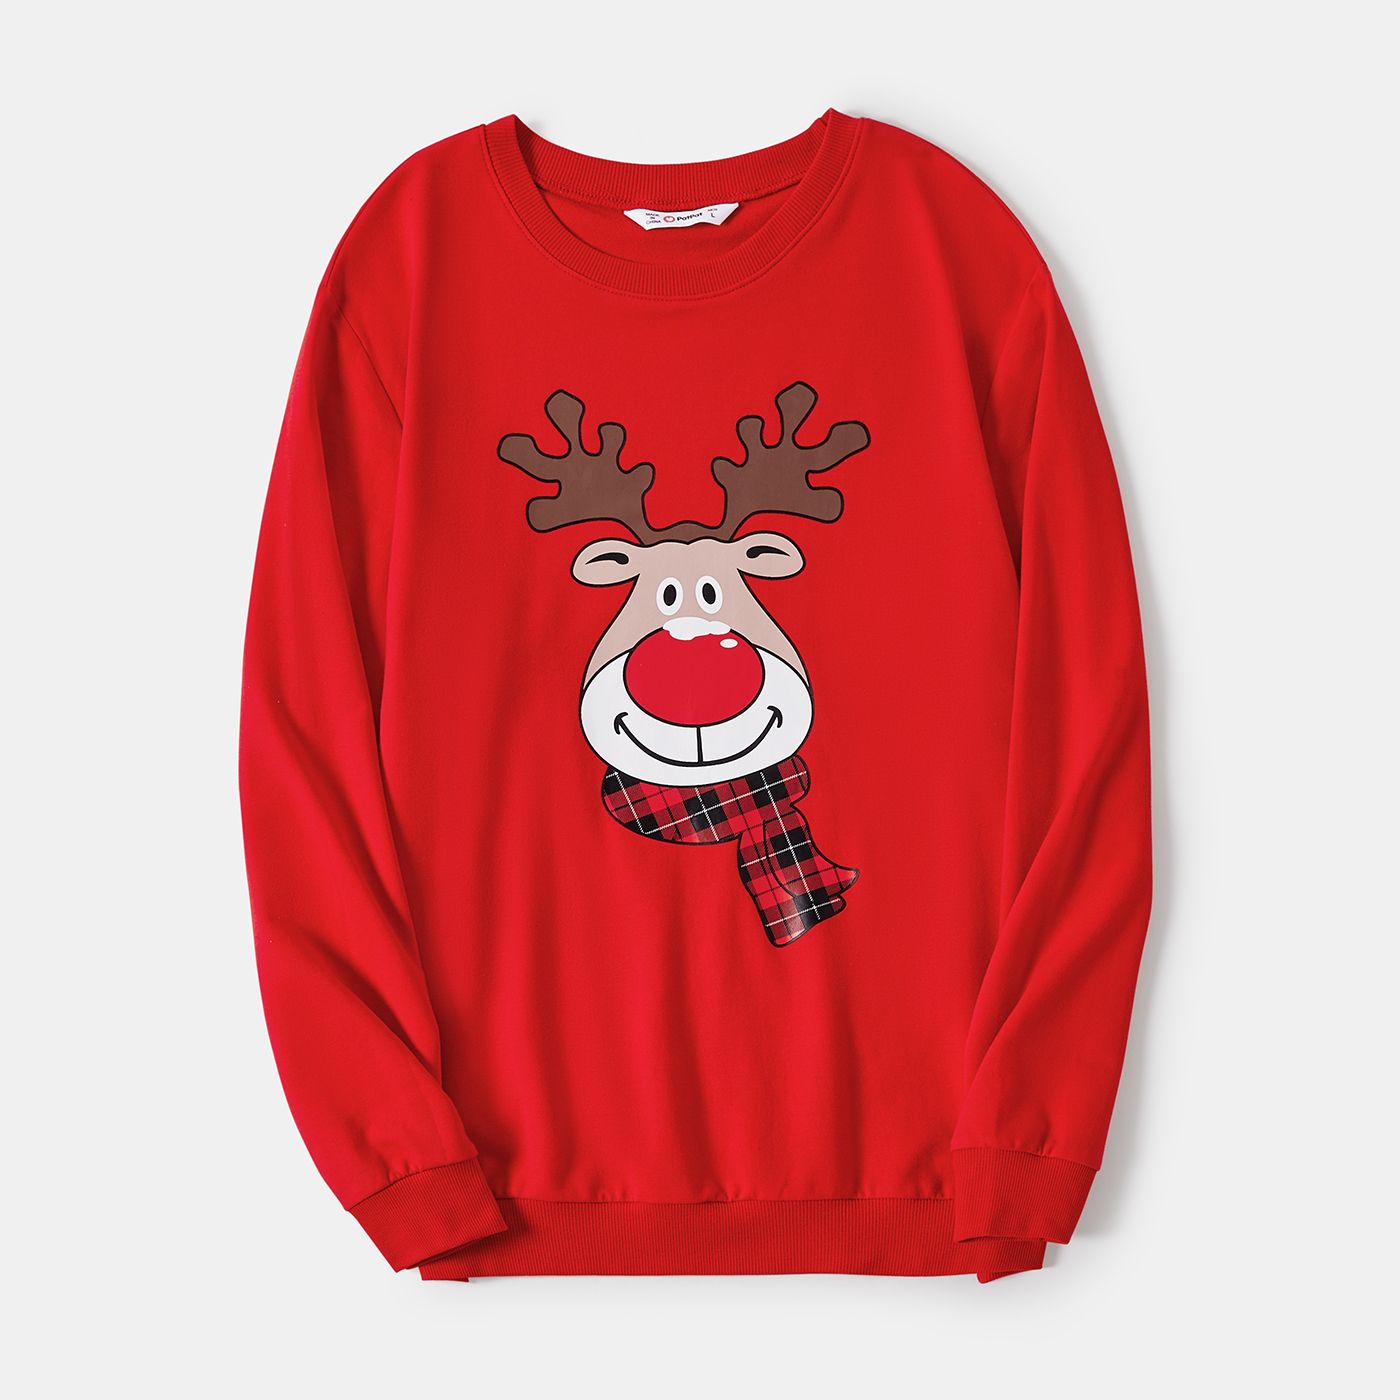 Christmas Family Matching Reindeer Print Red Tops